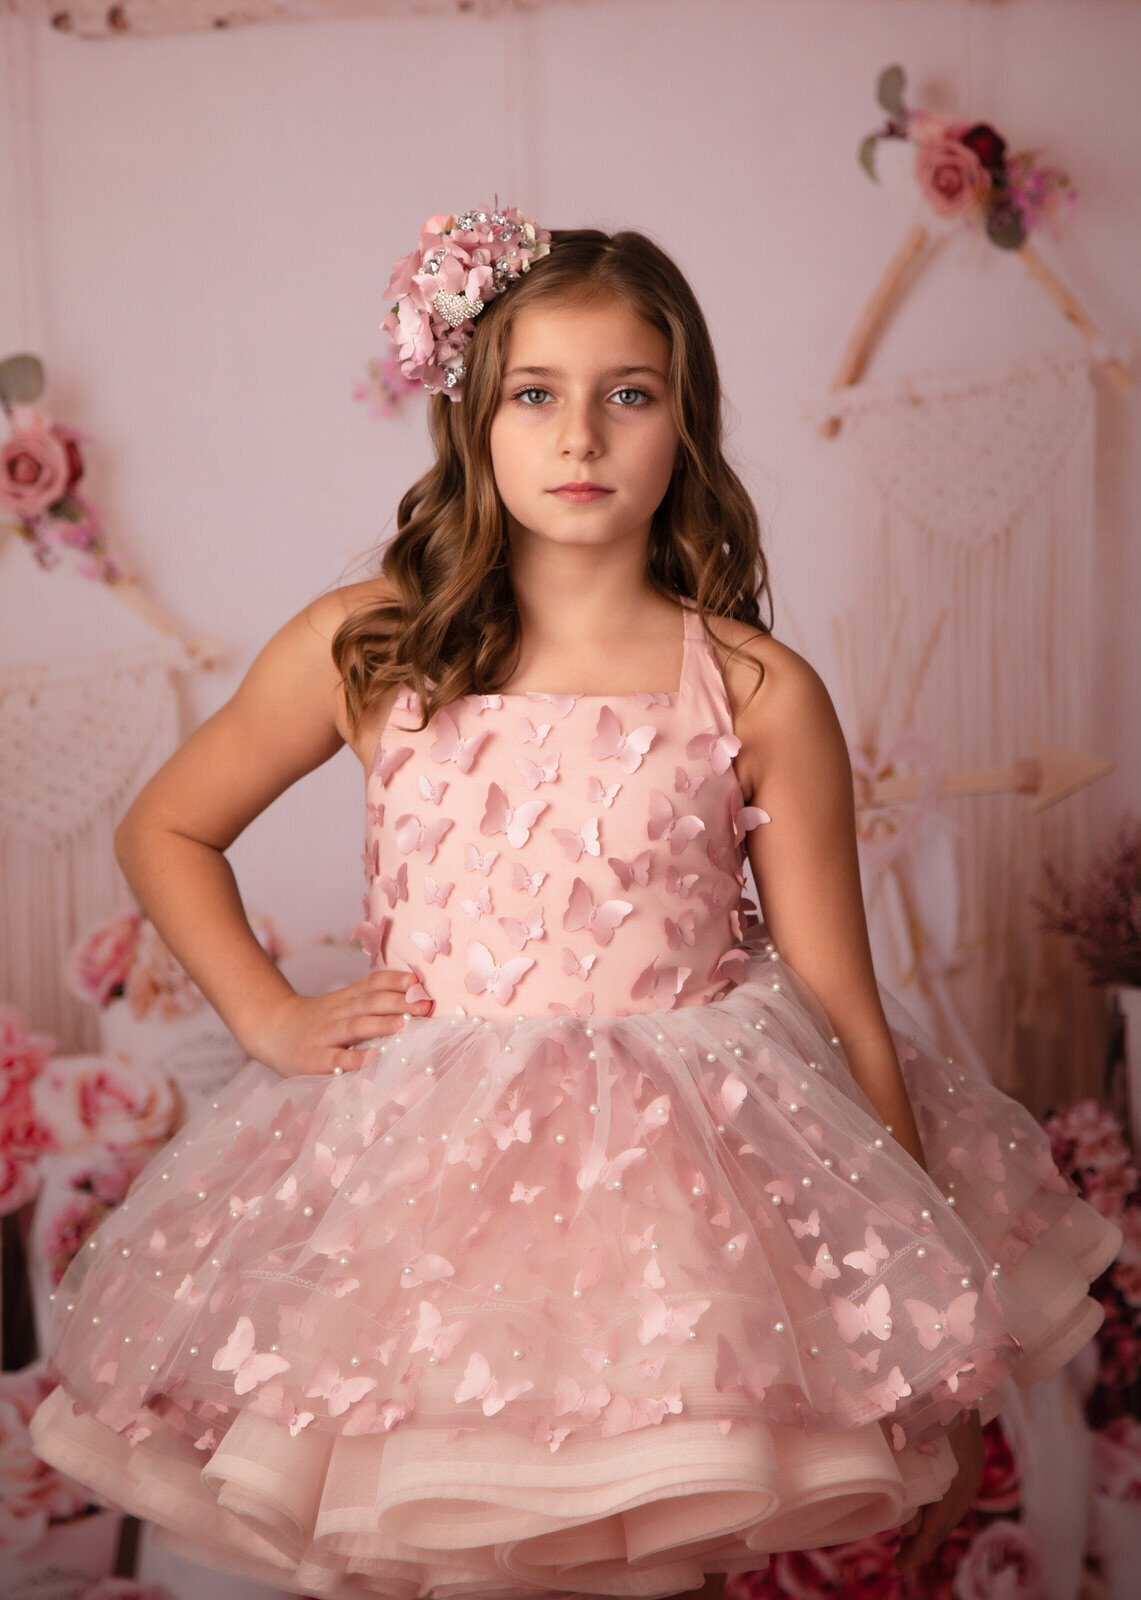 girl-in-pink-couture-gown-posing-in-studio-valentines-portraits